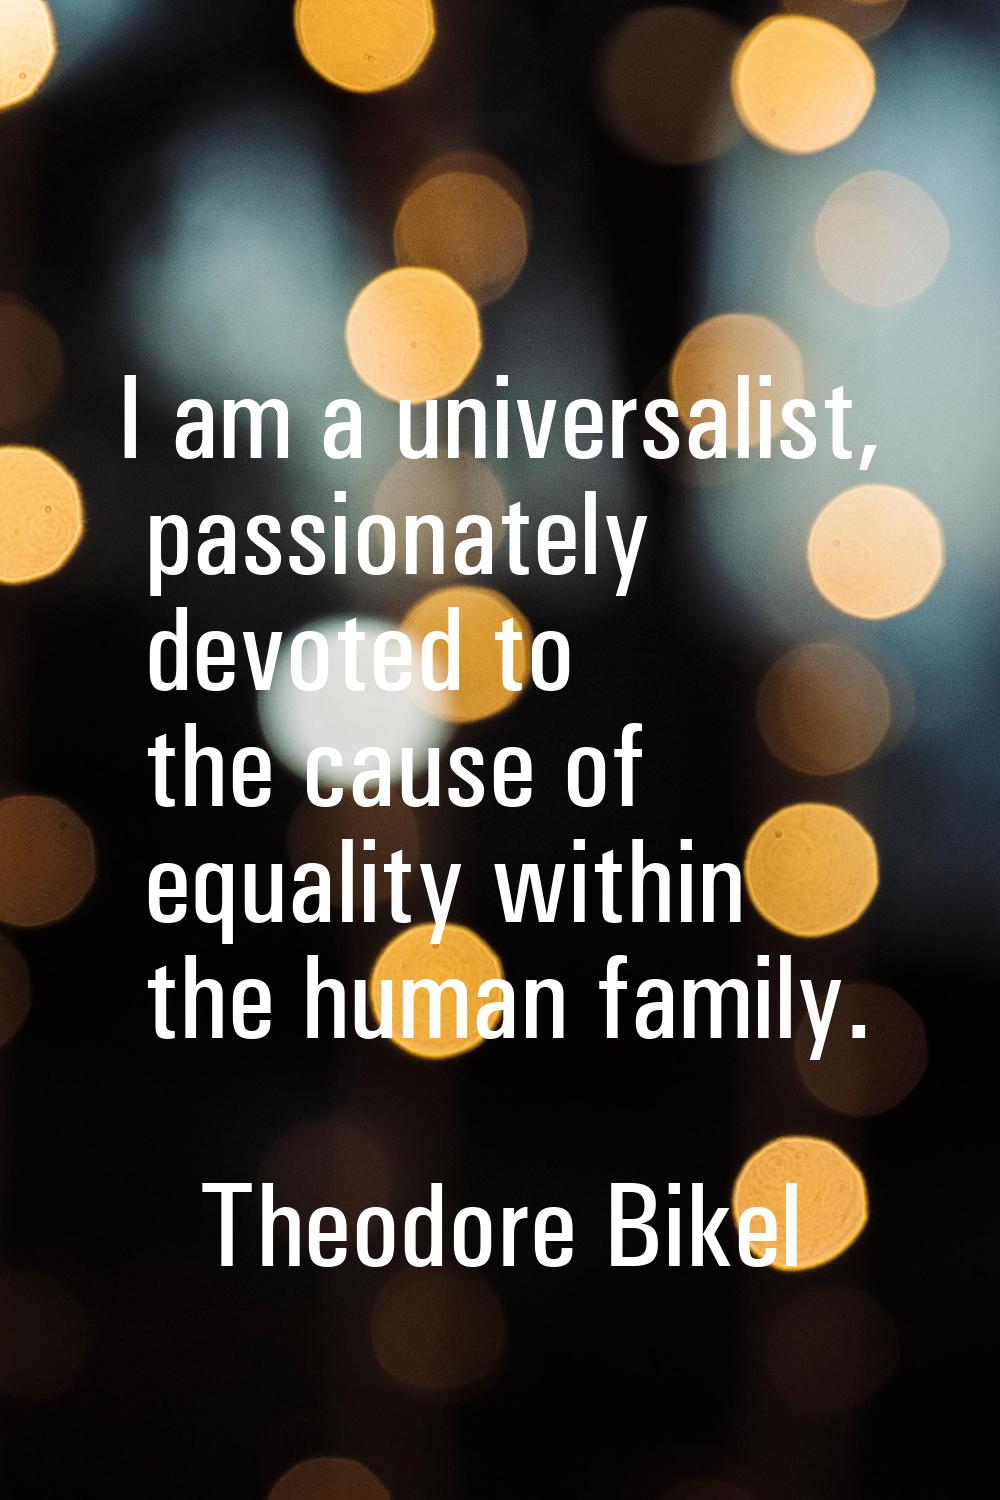 I am a universalist, passionately devoted to the cause of equality within the human family.